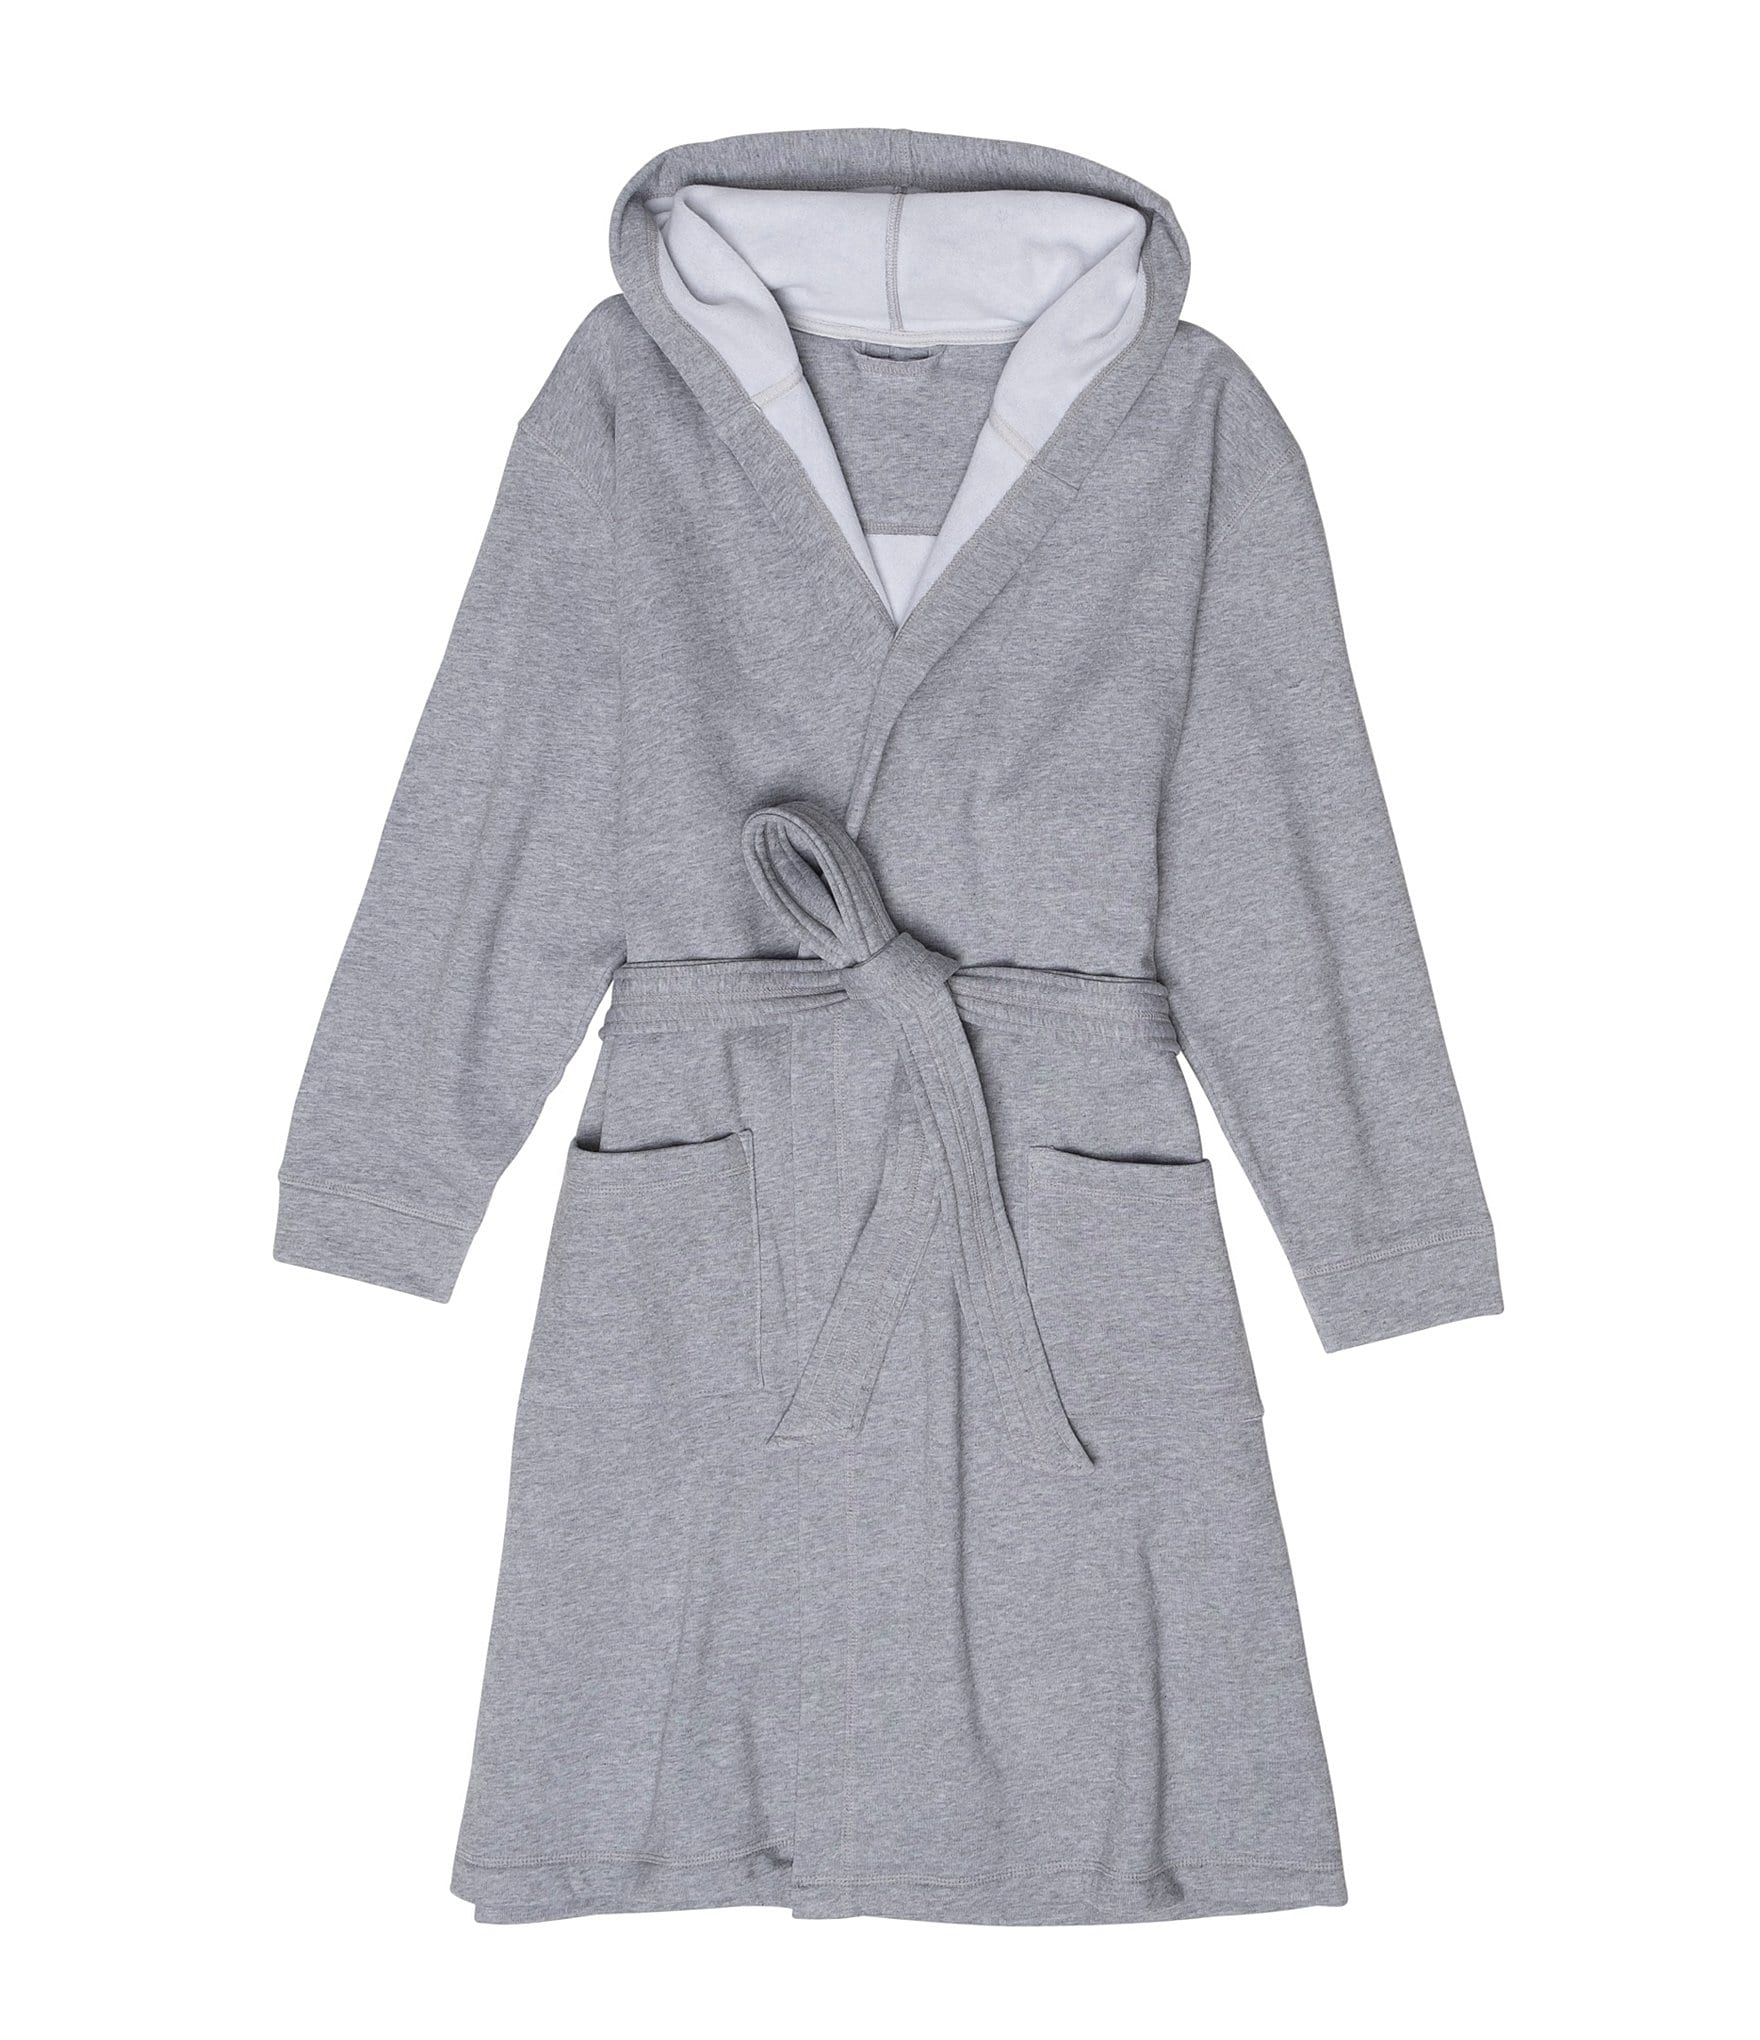 A shorter version of our classic robe, the Cozy Knit Short Robe is